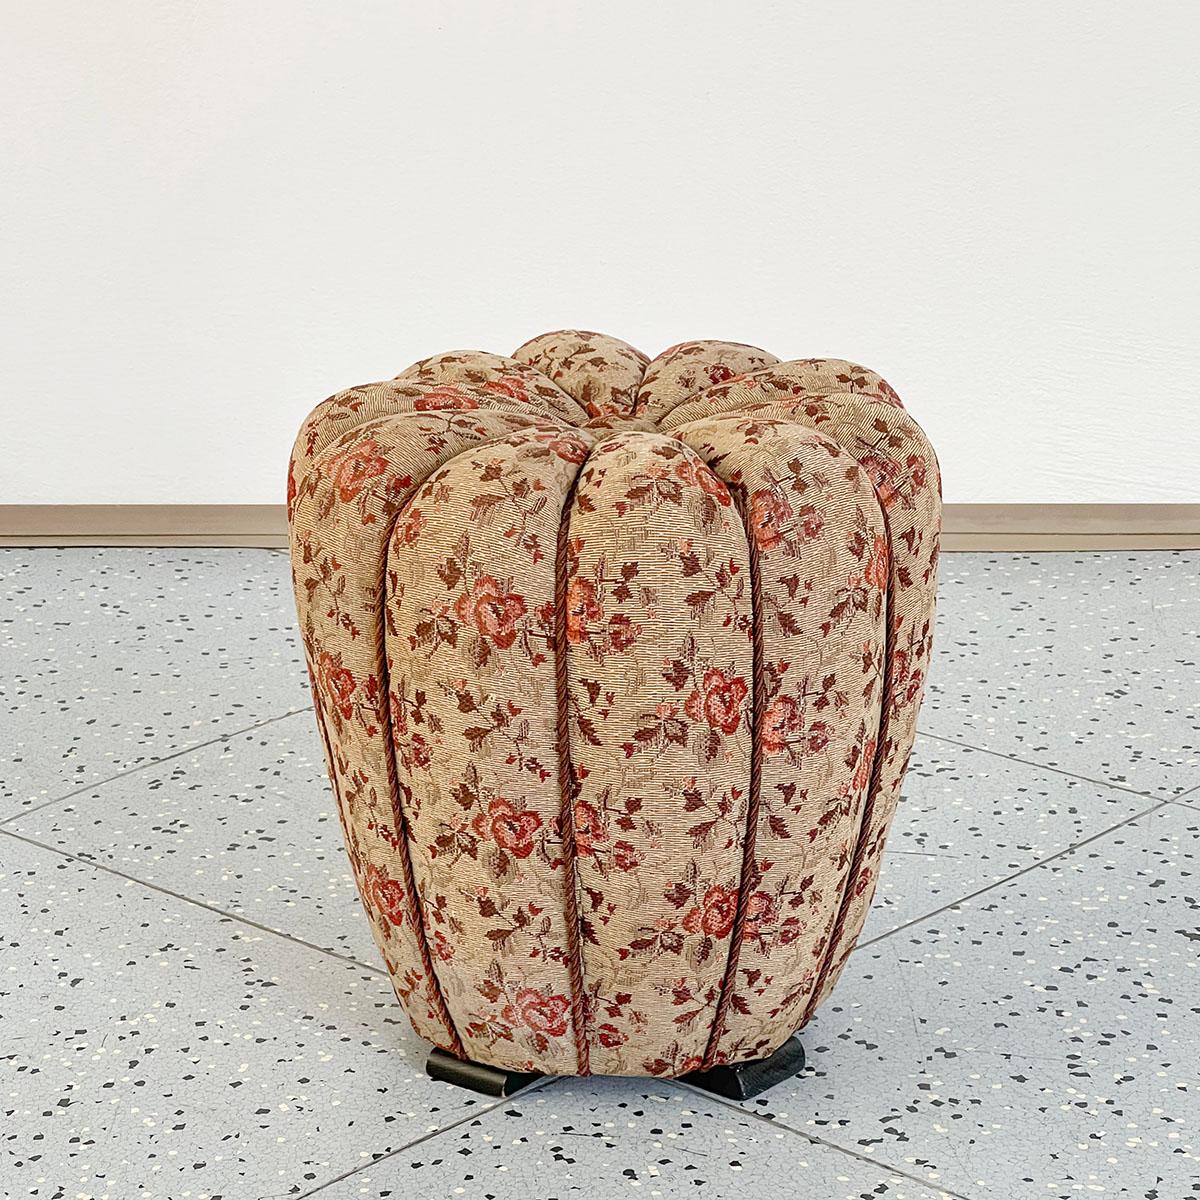 Stool in floral tapestry fabric and wood designed by Jindrich Halabala and manufactured by UP závody in former Czechoslovakia, 1930s.

This elegant Art Deco stool was designed by Jindrich Halabala and manufactured by UP závody in the 1930s. This